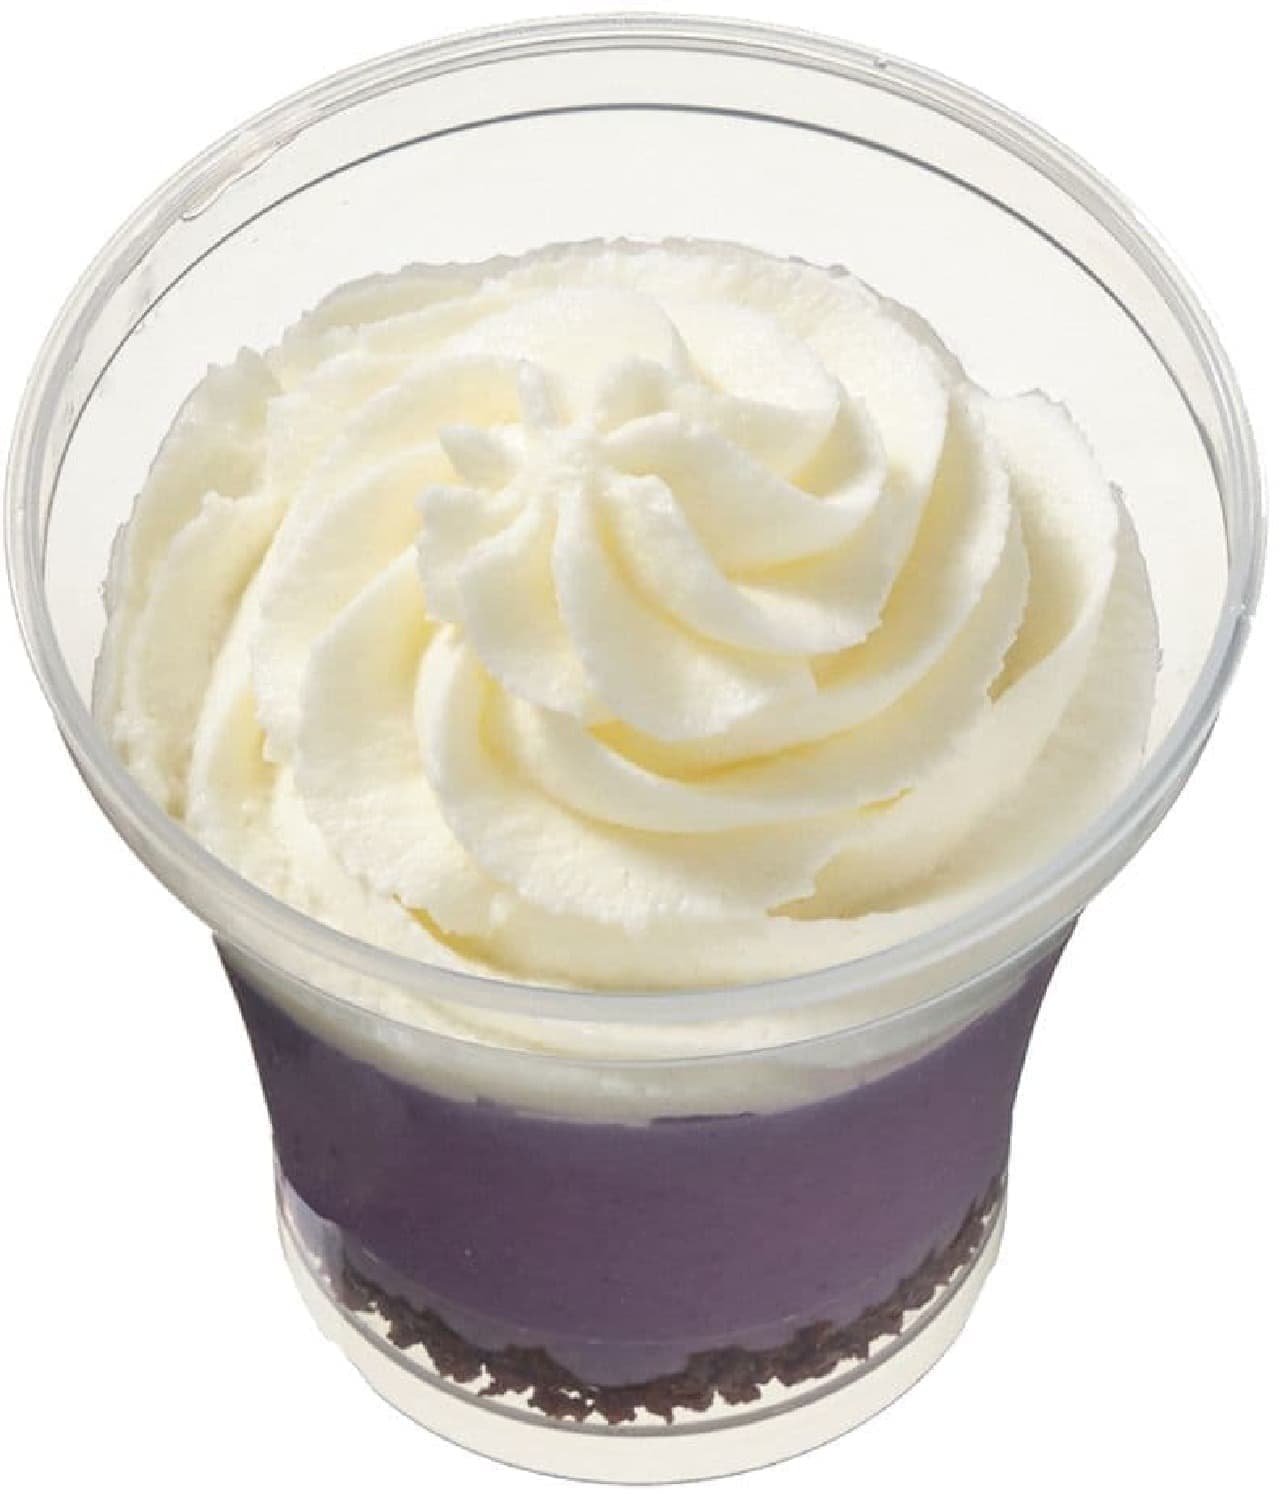 7-Eleven "Blueberry Mousse & Rare Cheese Whip